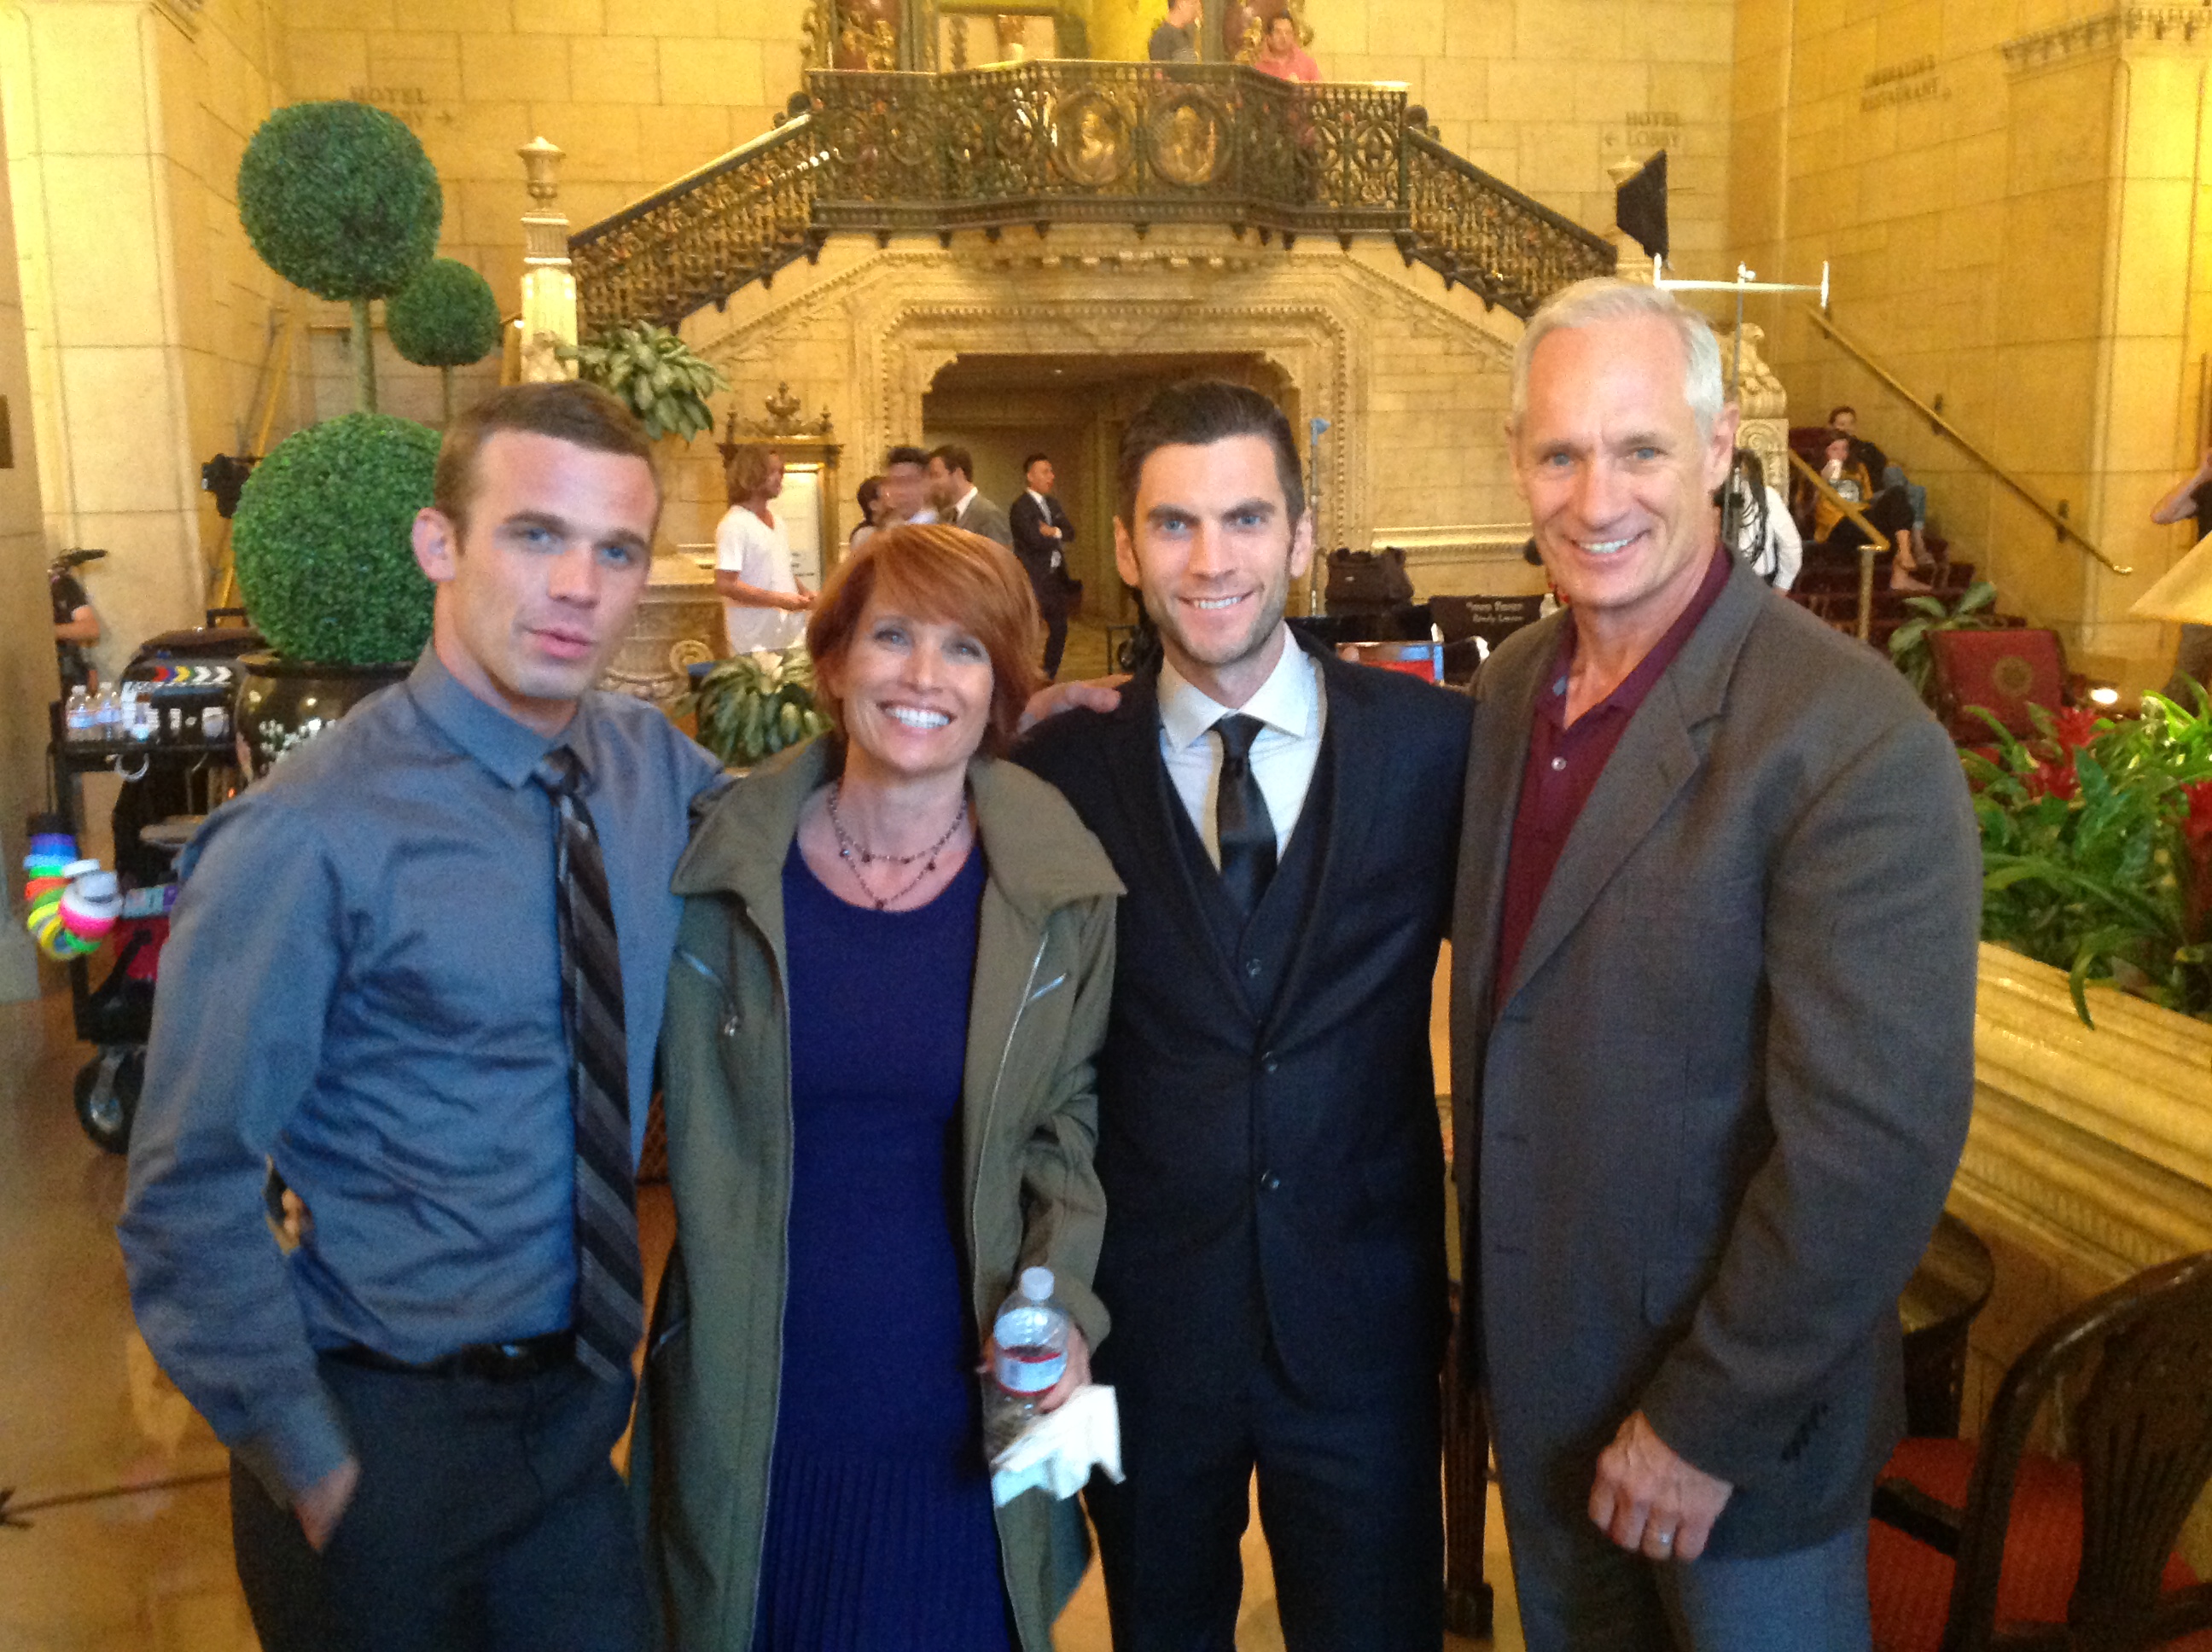 Shooting Broken Vows (2014) at The Biltmore Hotel in Los Angeles with Cam Gigandet, Rene Ashton and Wes Bentley.